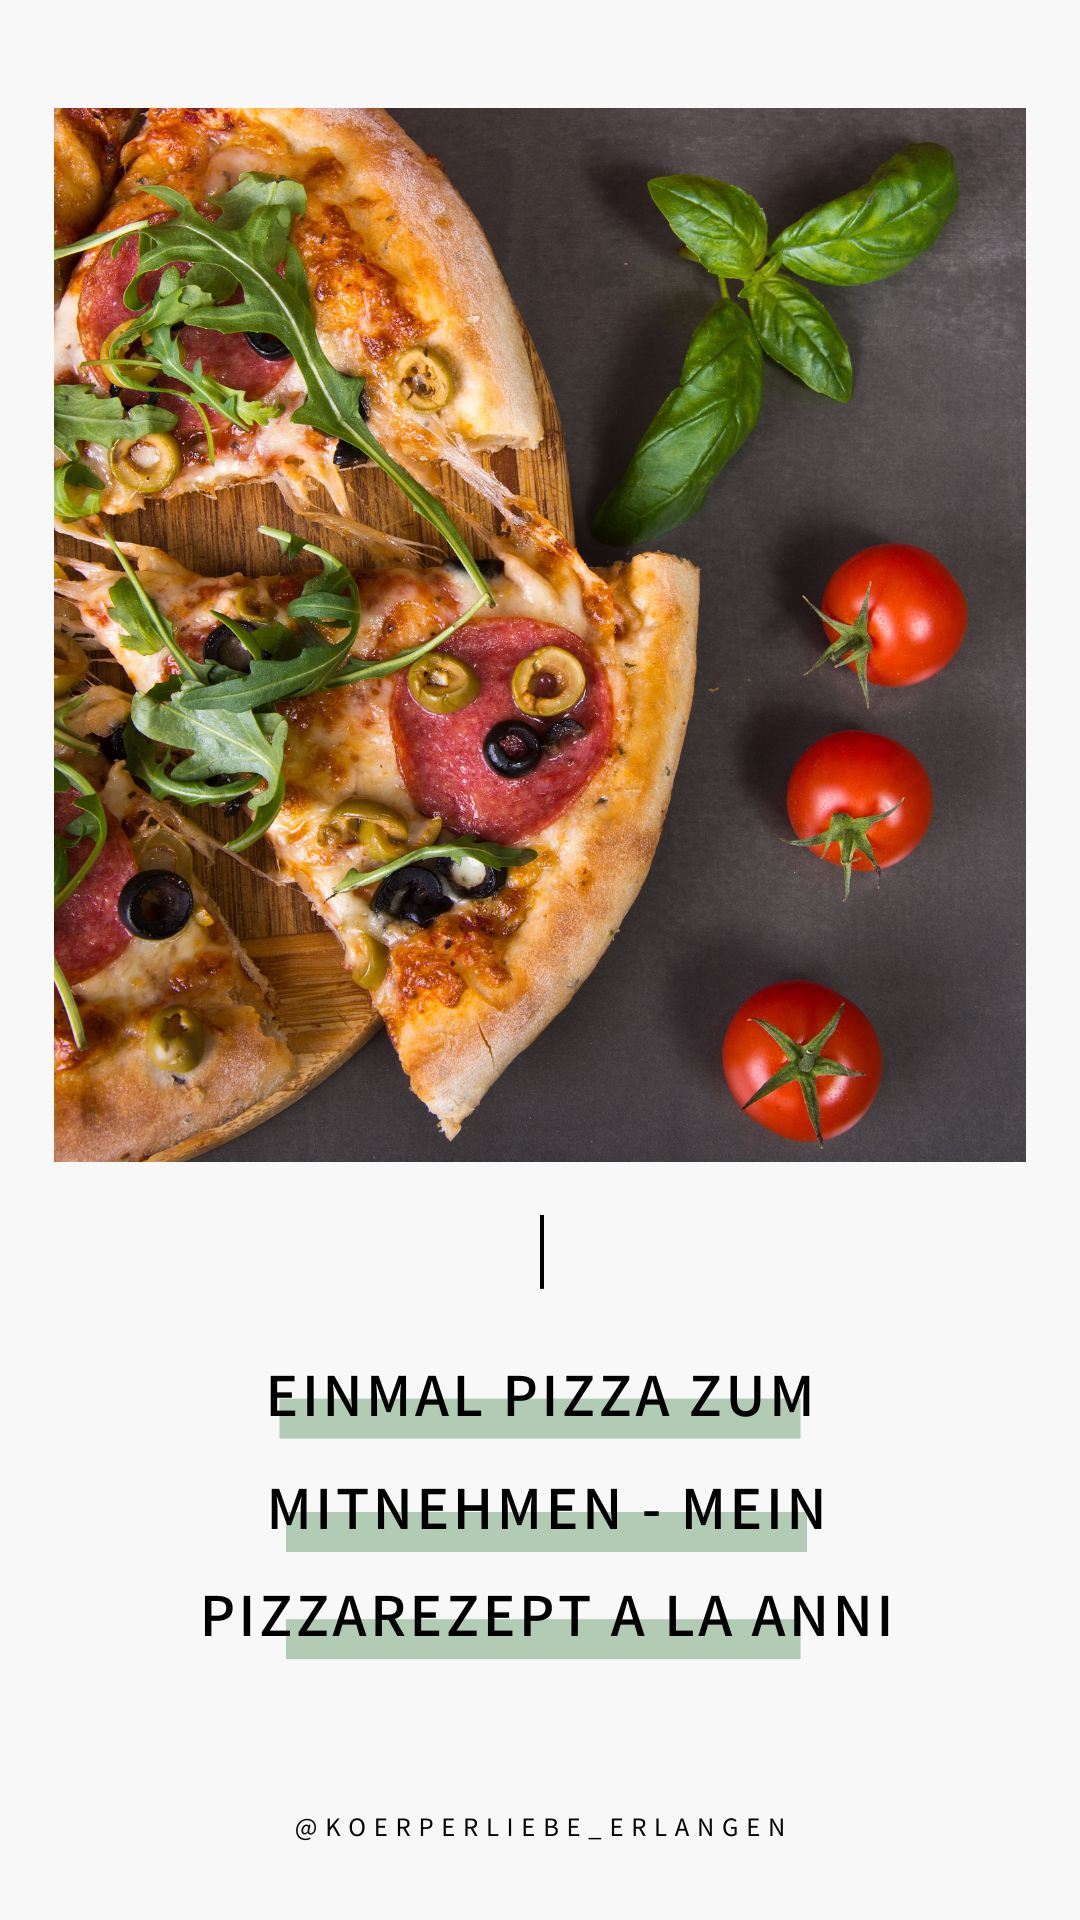 Featured image for “Selbstgemachte Pizza a la Anni”